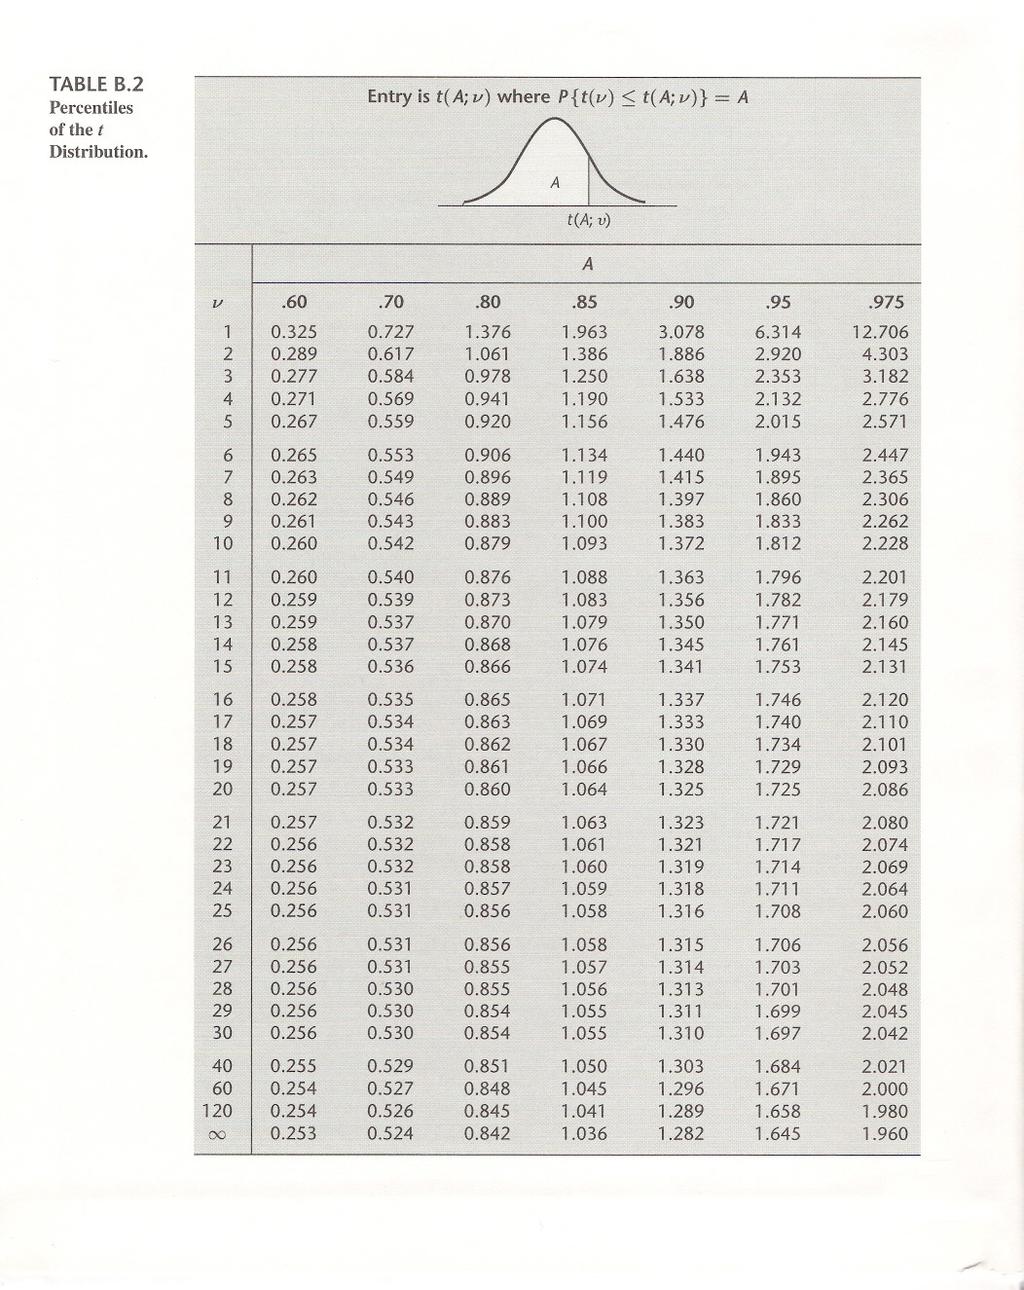 Page 30 of 32 TABLEB.2 Percentiles of the t Distribution. Entryis t(a;v) where P{t(v)::; t(a;v)} = A & t(a; v) v.60.70.80.85.90.95.975 1 0.325 0.727 1.376 1.963 3.078 6.314 12.706 2 0.289 0.617 1.